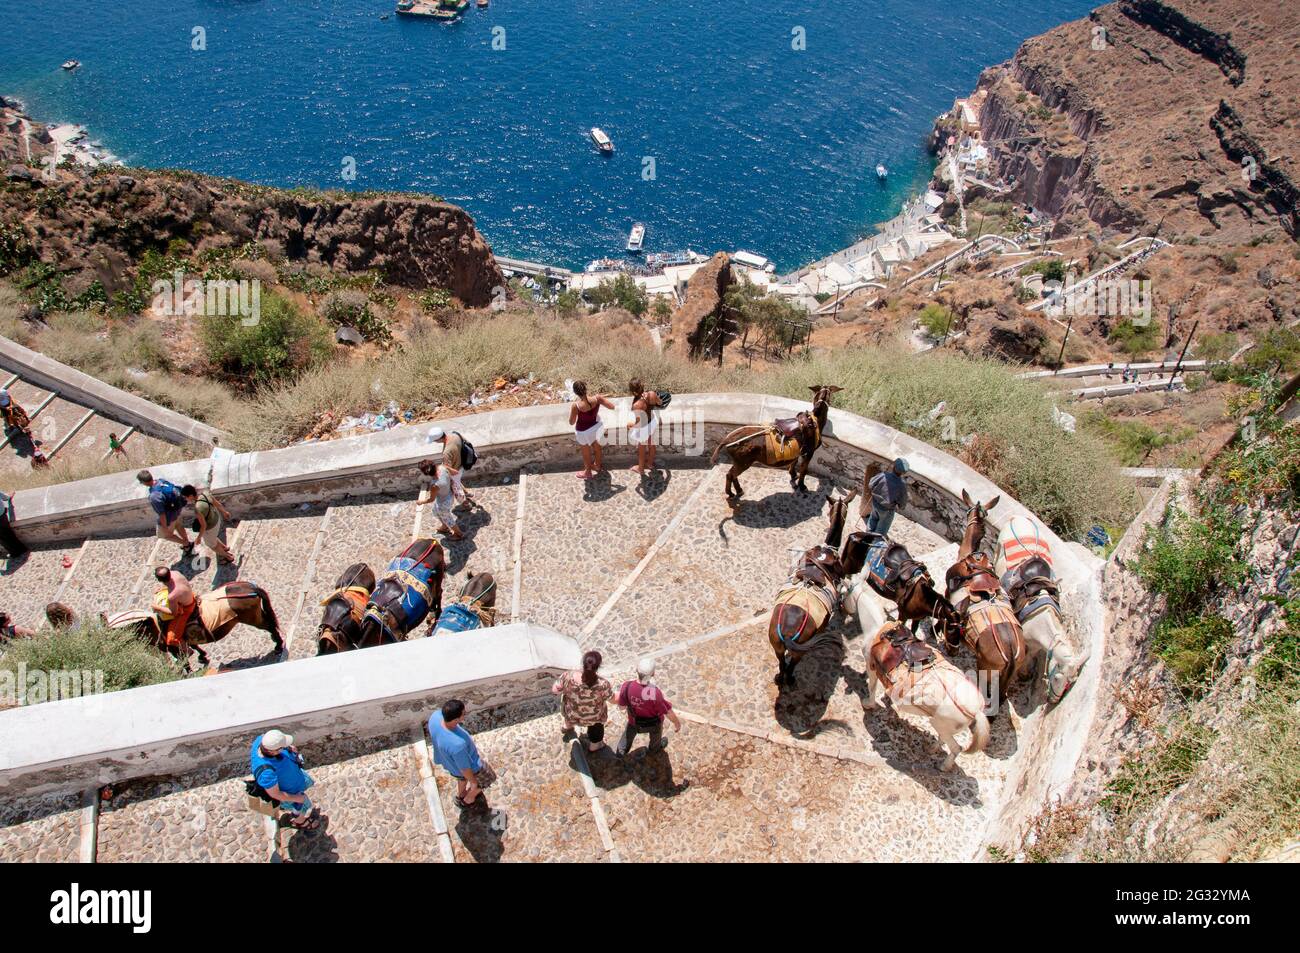 An Aerial shot of a group of tourists with mule cabs in Santorini island, Greece. Donkey cabs transport tourists Stock Photo